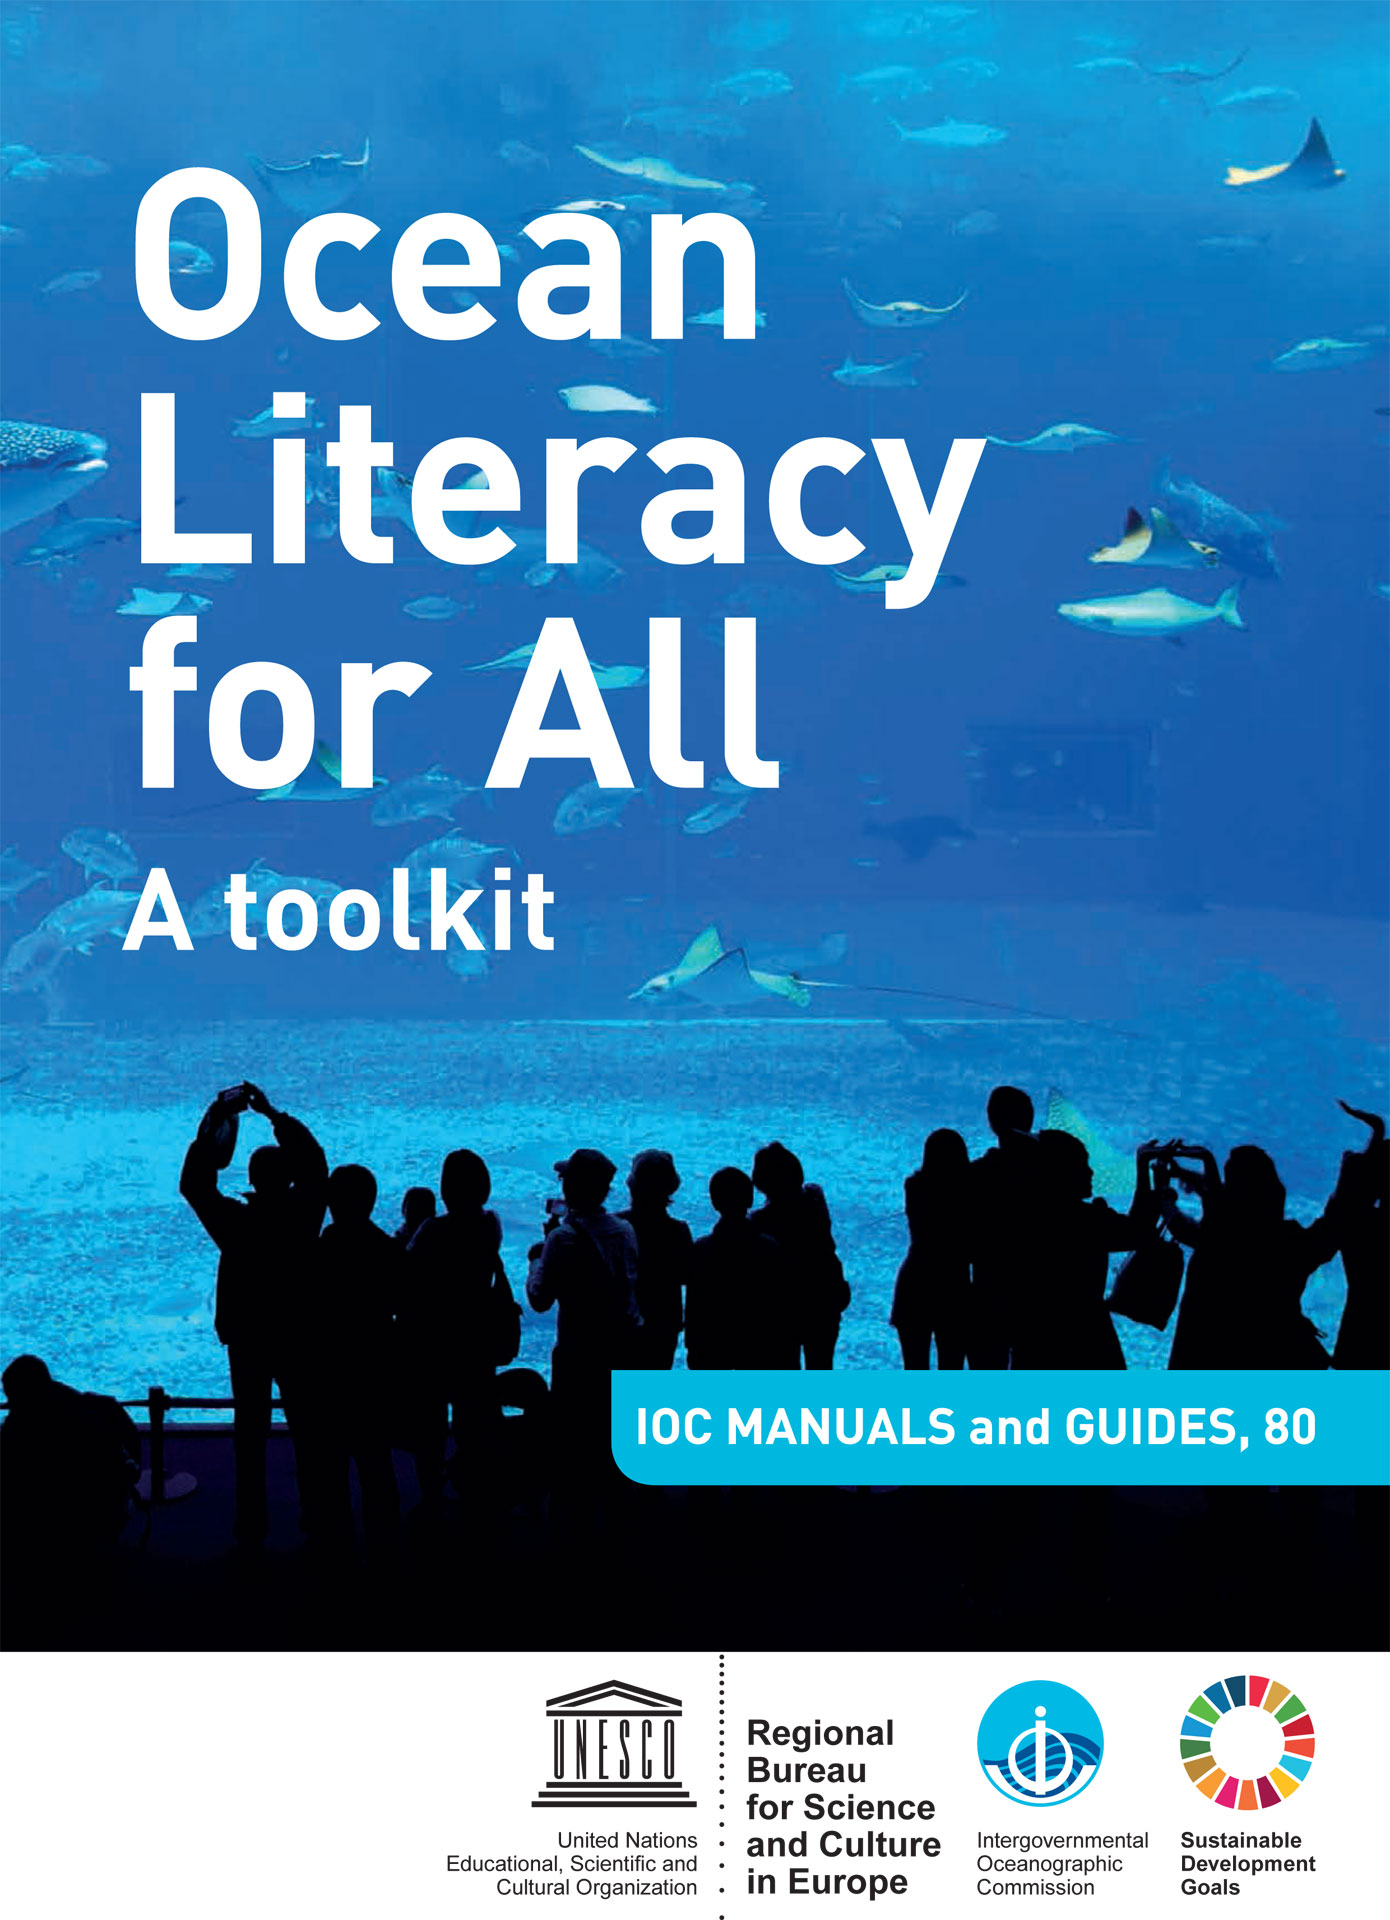 Ocean literacy for all: a toolkit